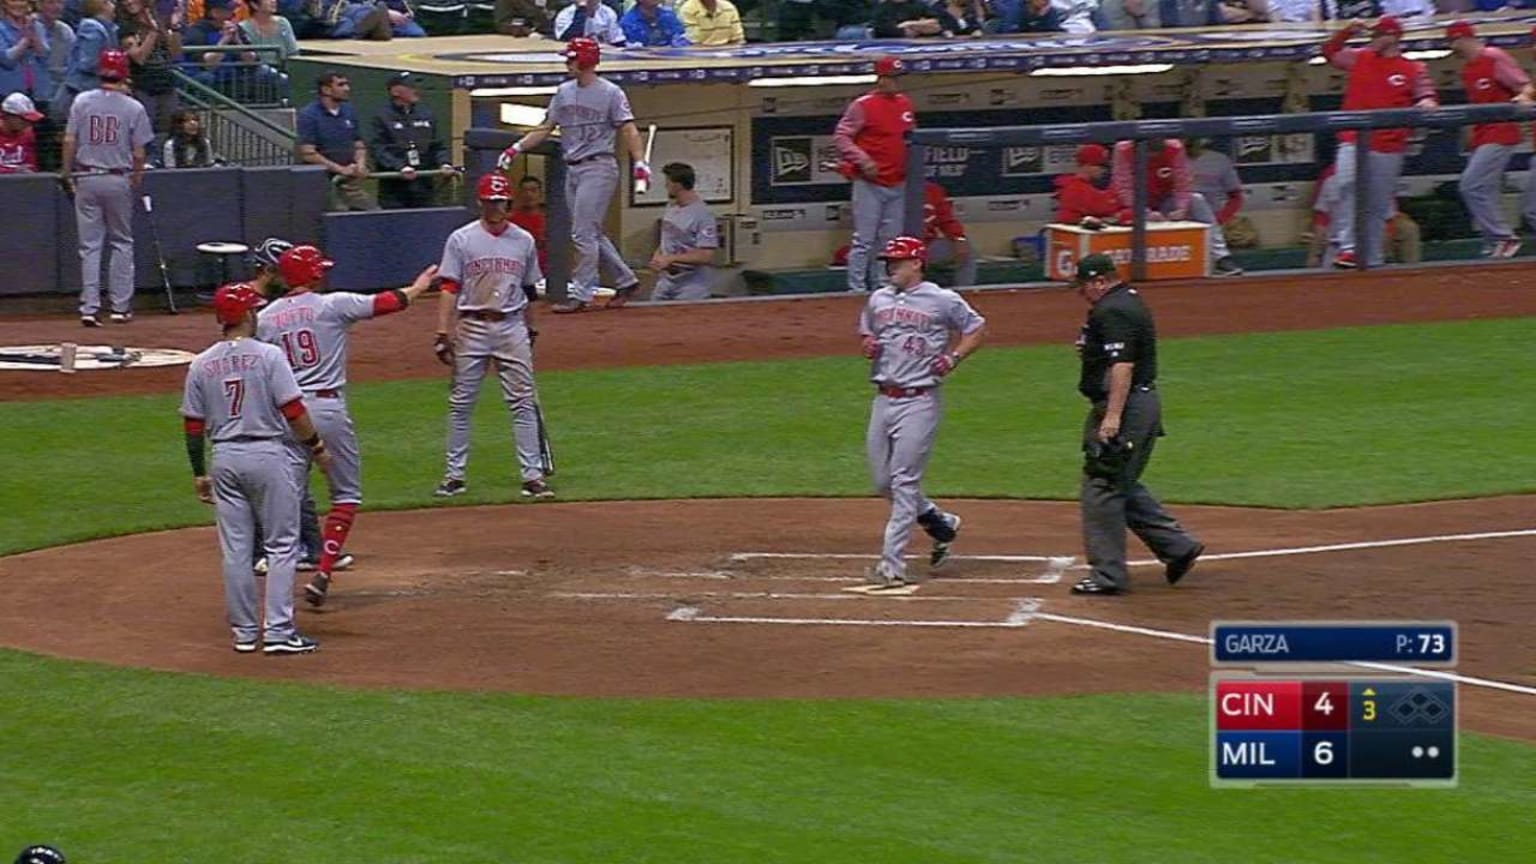 CIN@MIL: Edmonds' homer gets Reds on the board early 